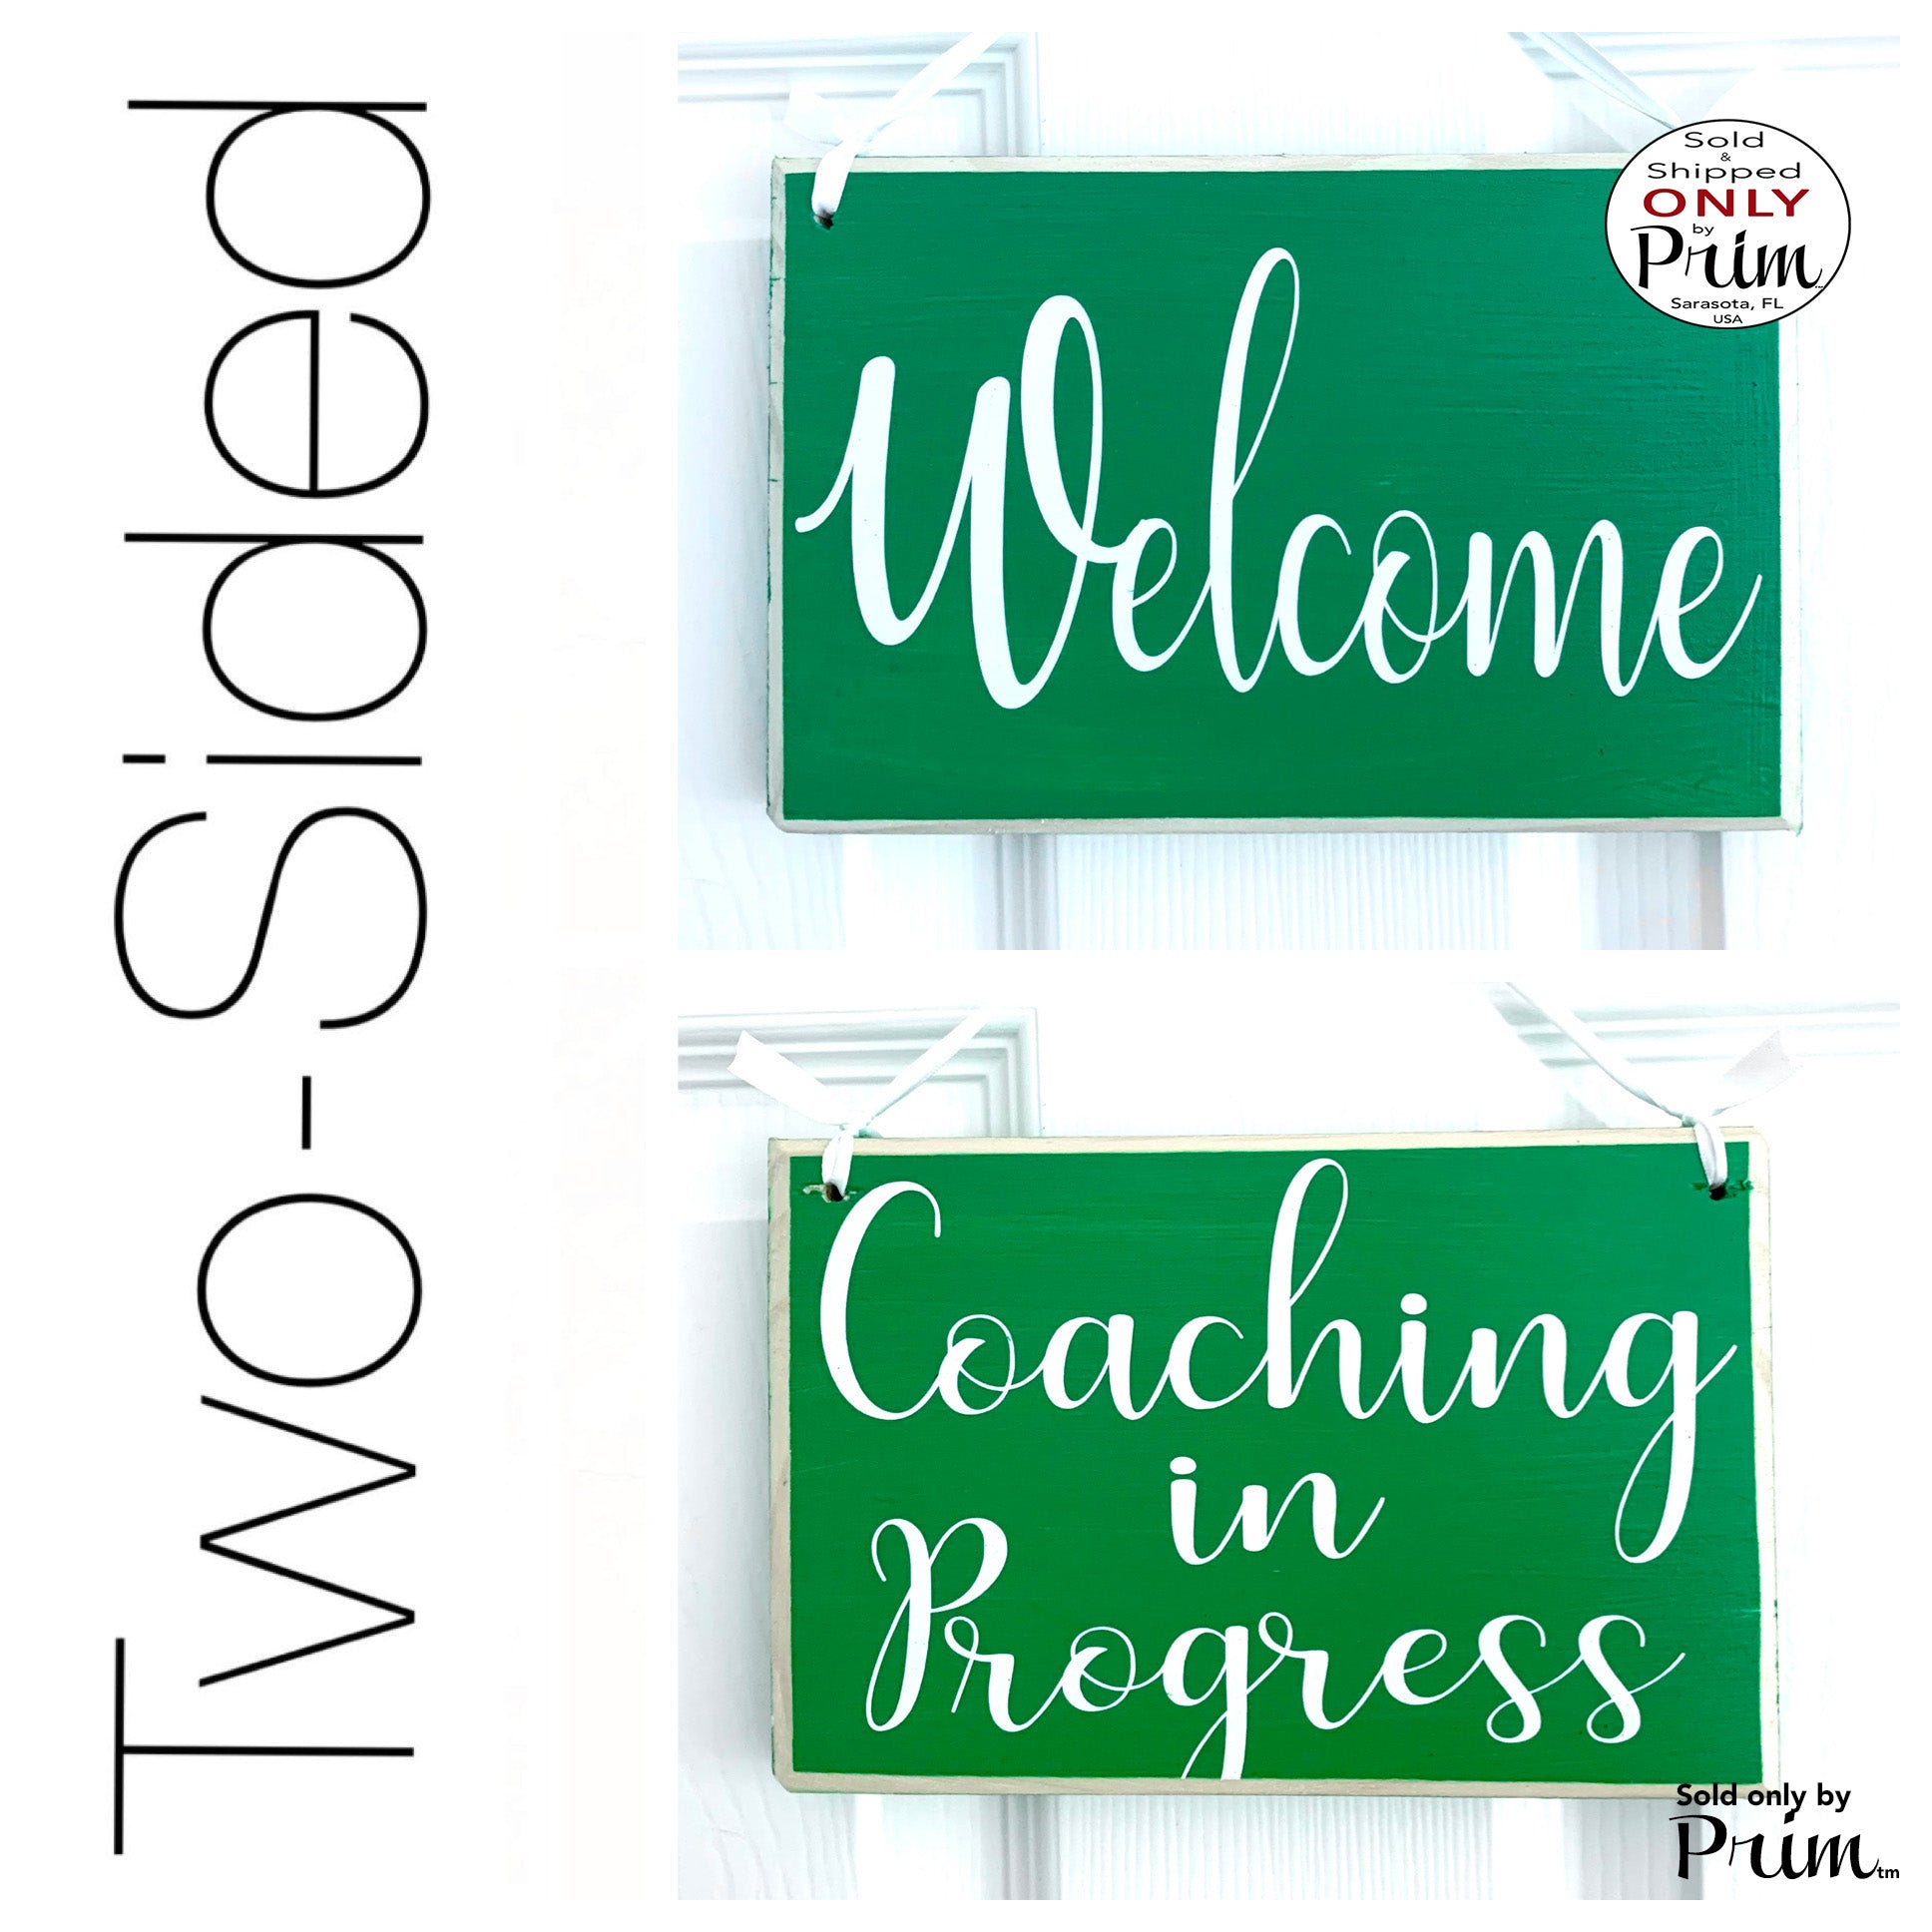 Designs by Prim 8x6 Welcome Coaching in Progress Wood Sign | Patient Counseling Client Doctor Nurse Therapy Office in Progress Session Door Plaque